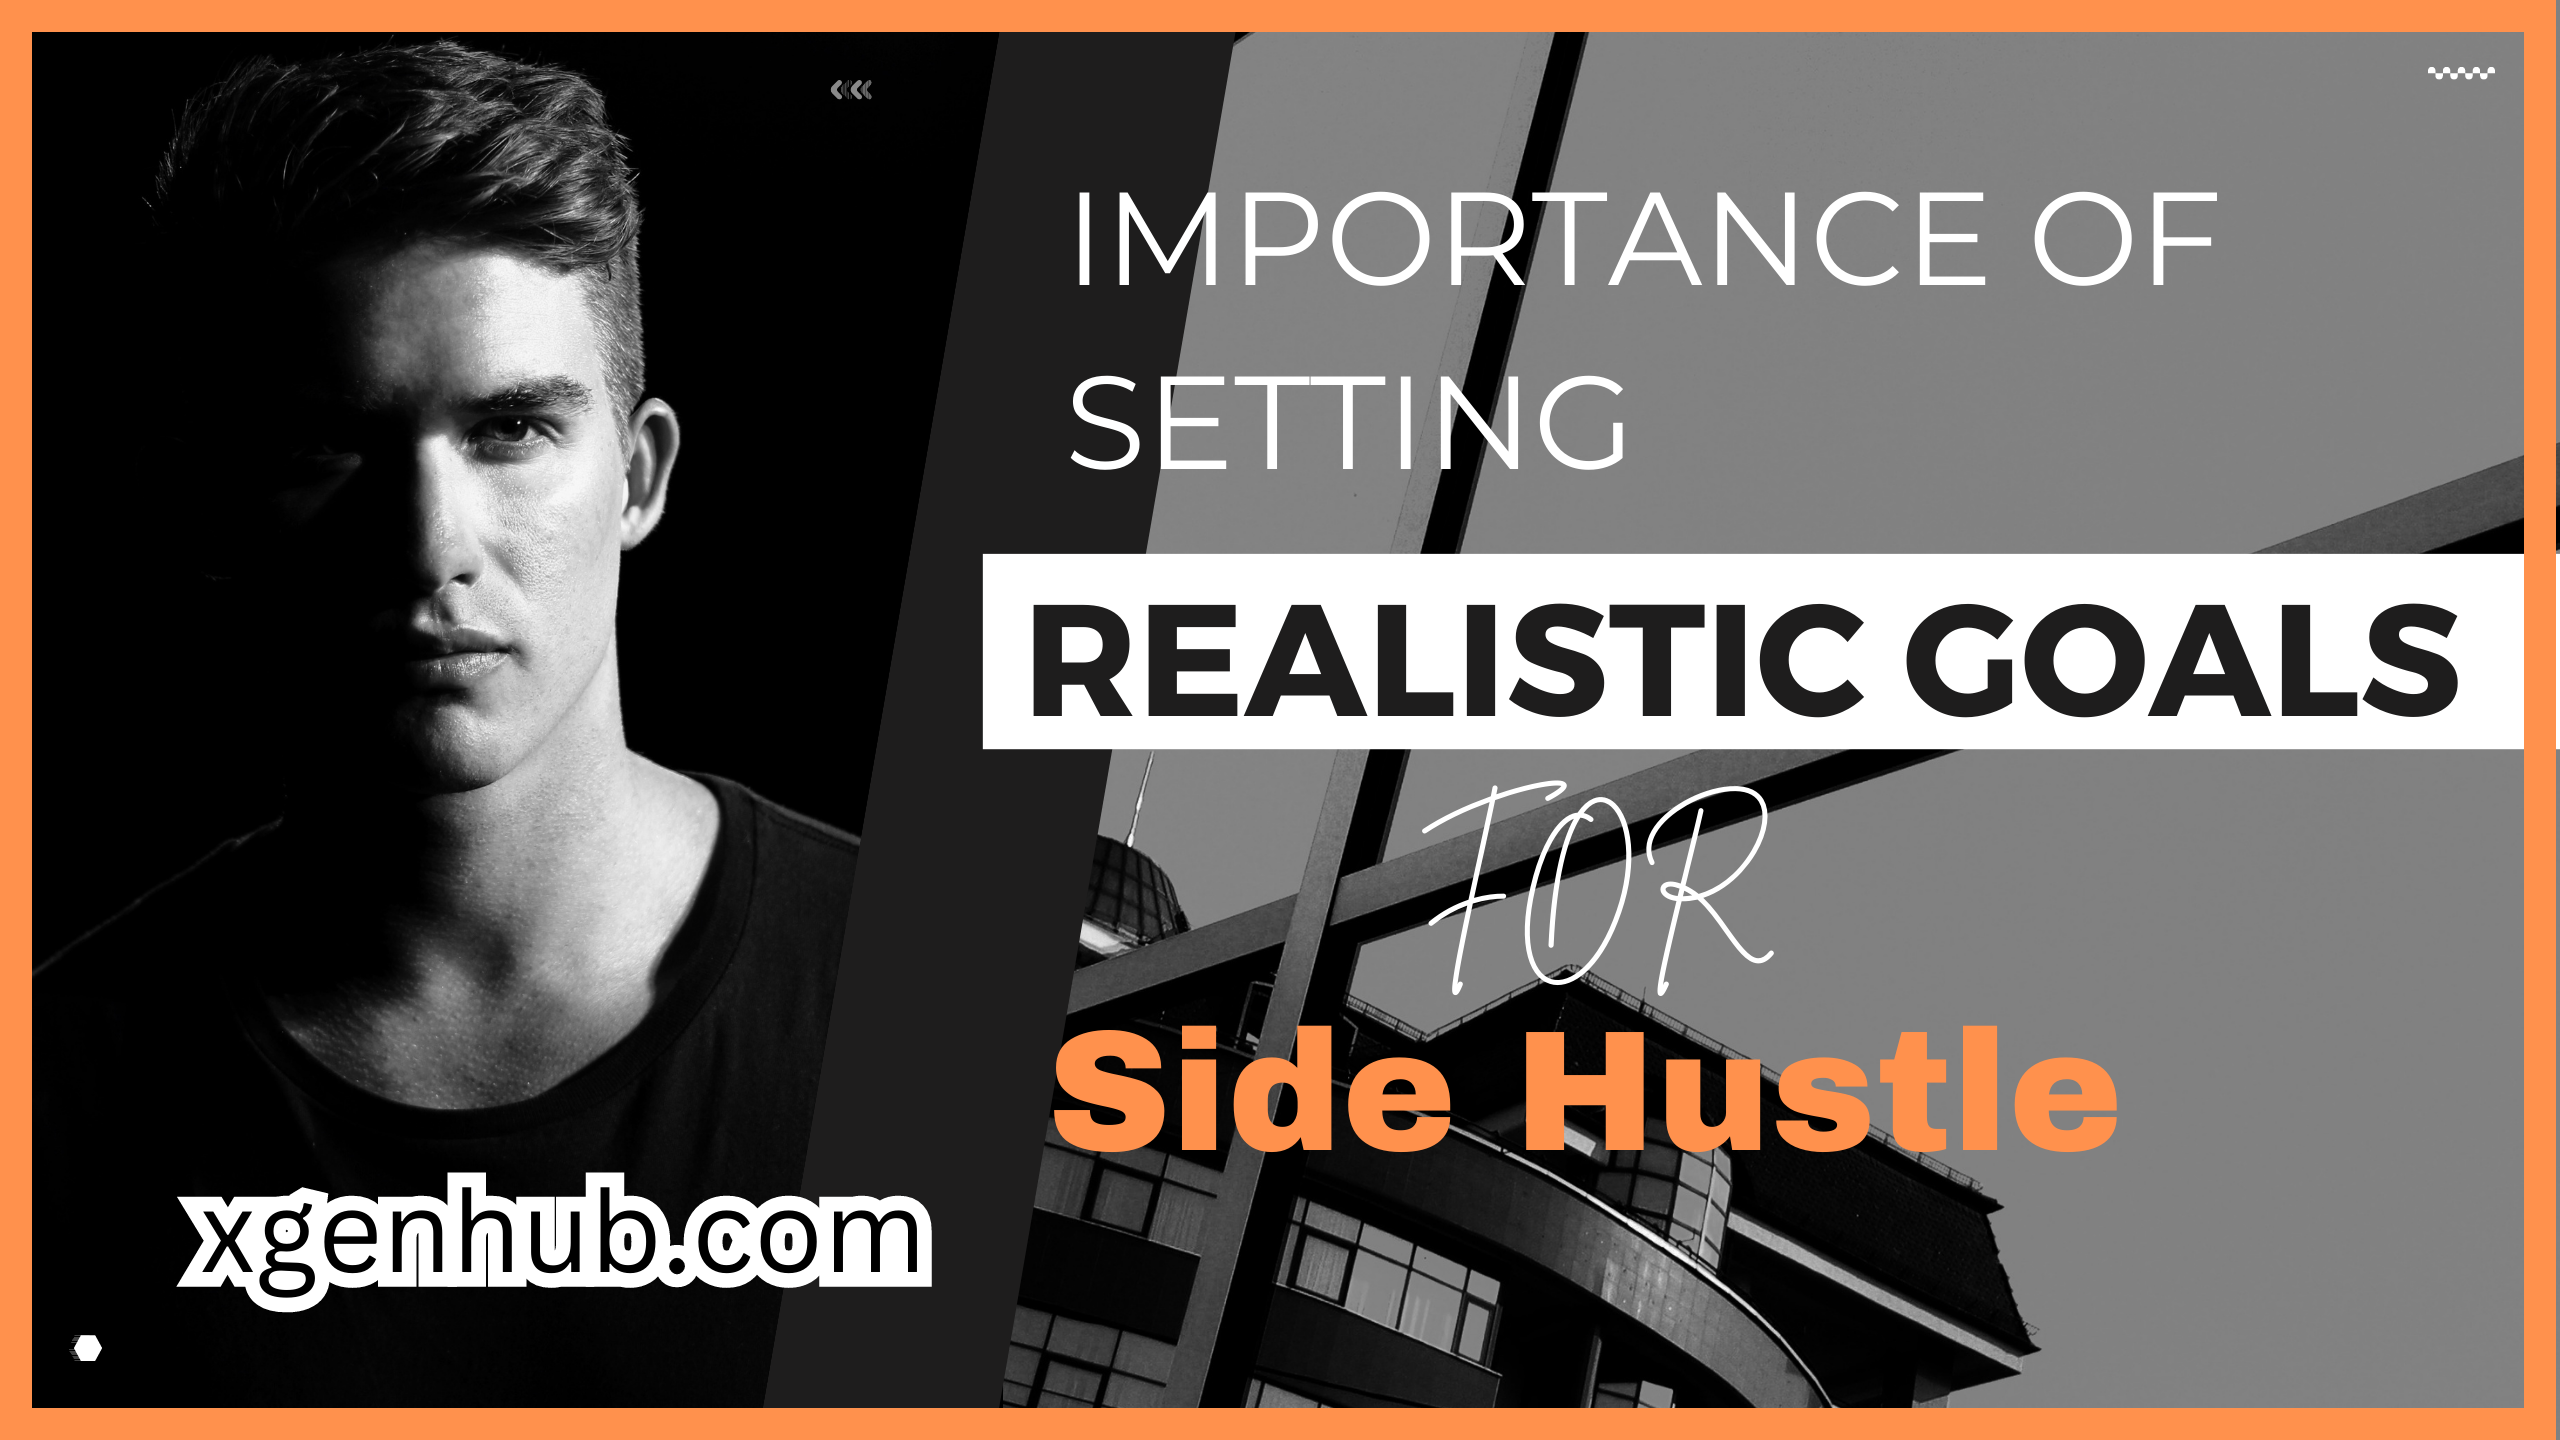 The Importance of Setting Realistic Goals for Your Side Hustle